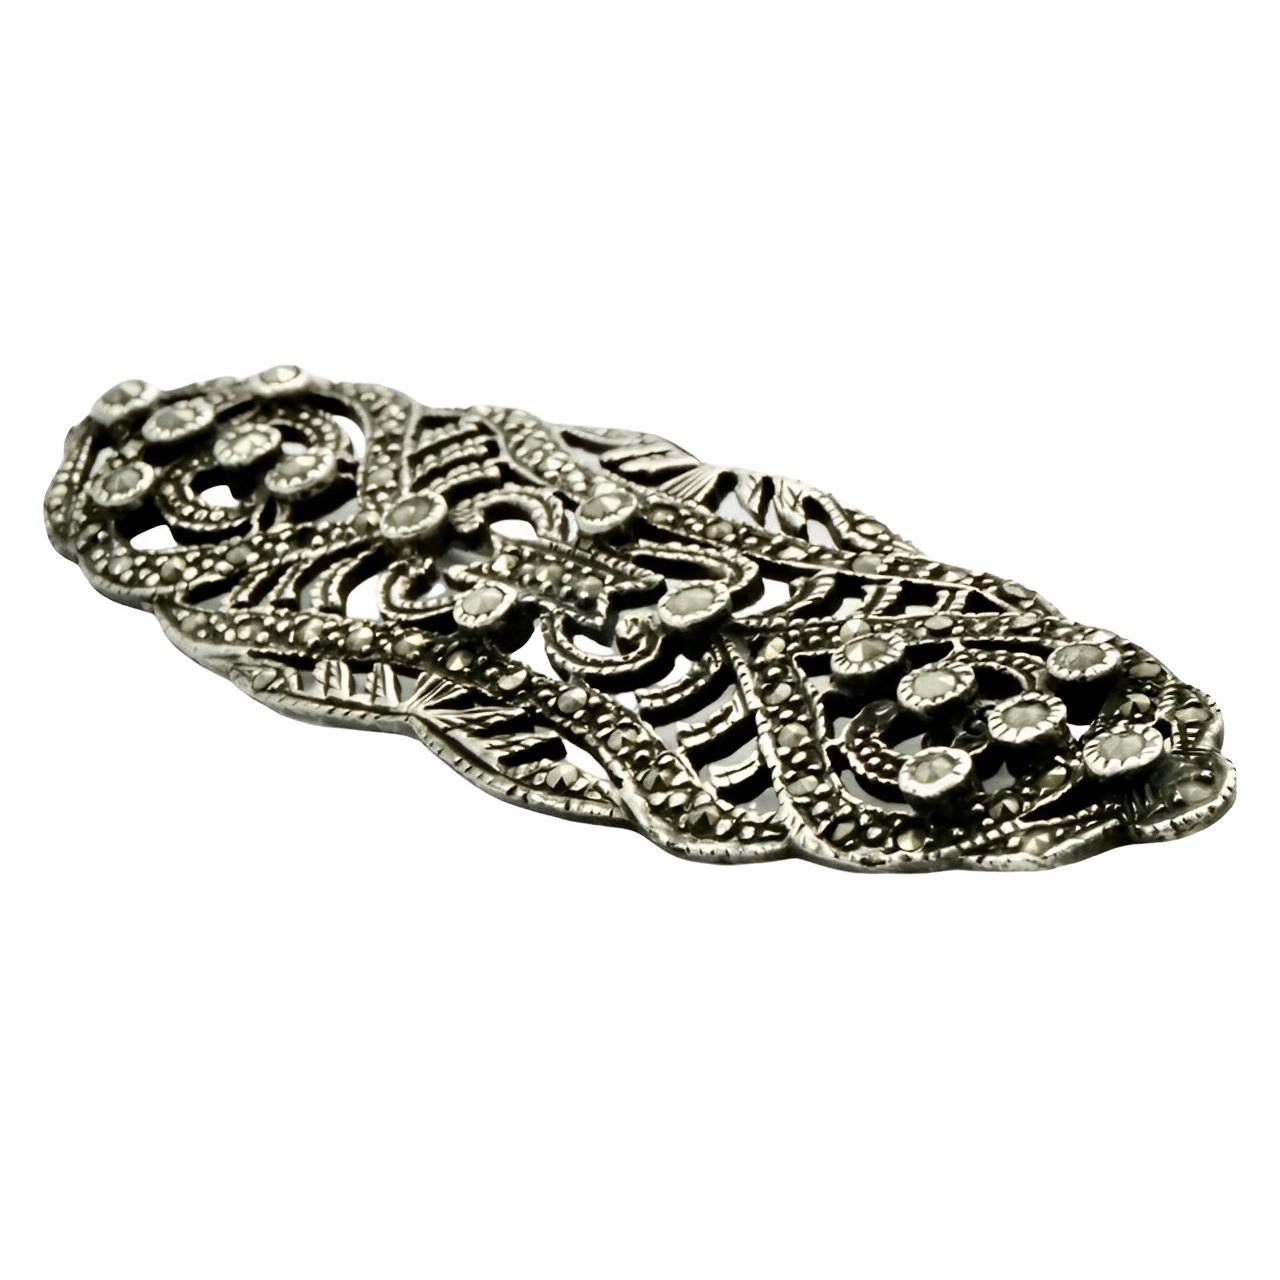 Beautiful classic silver brooch set with marcasites. Measuring length 7.6 cm / 3 inches by width 2.4 cm / .9 inch. We have given the brooch a light clean. We replaced two missing marcasites.

This is an ornate silver brooch with twinkling